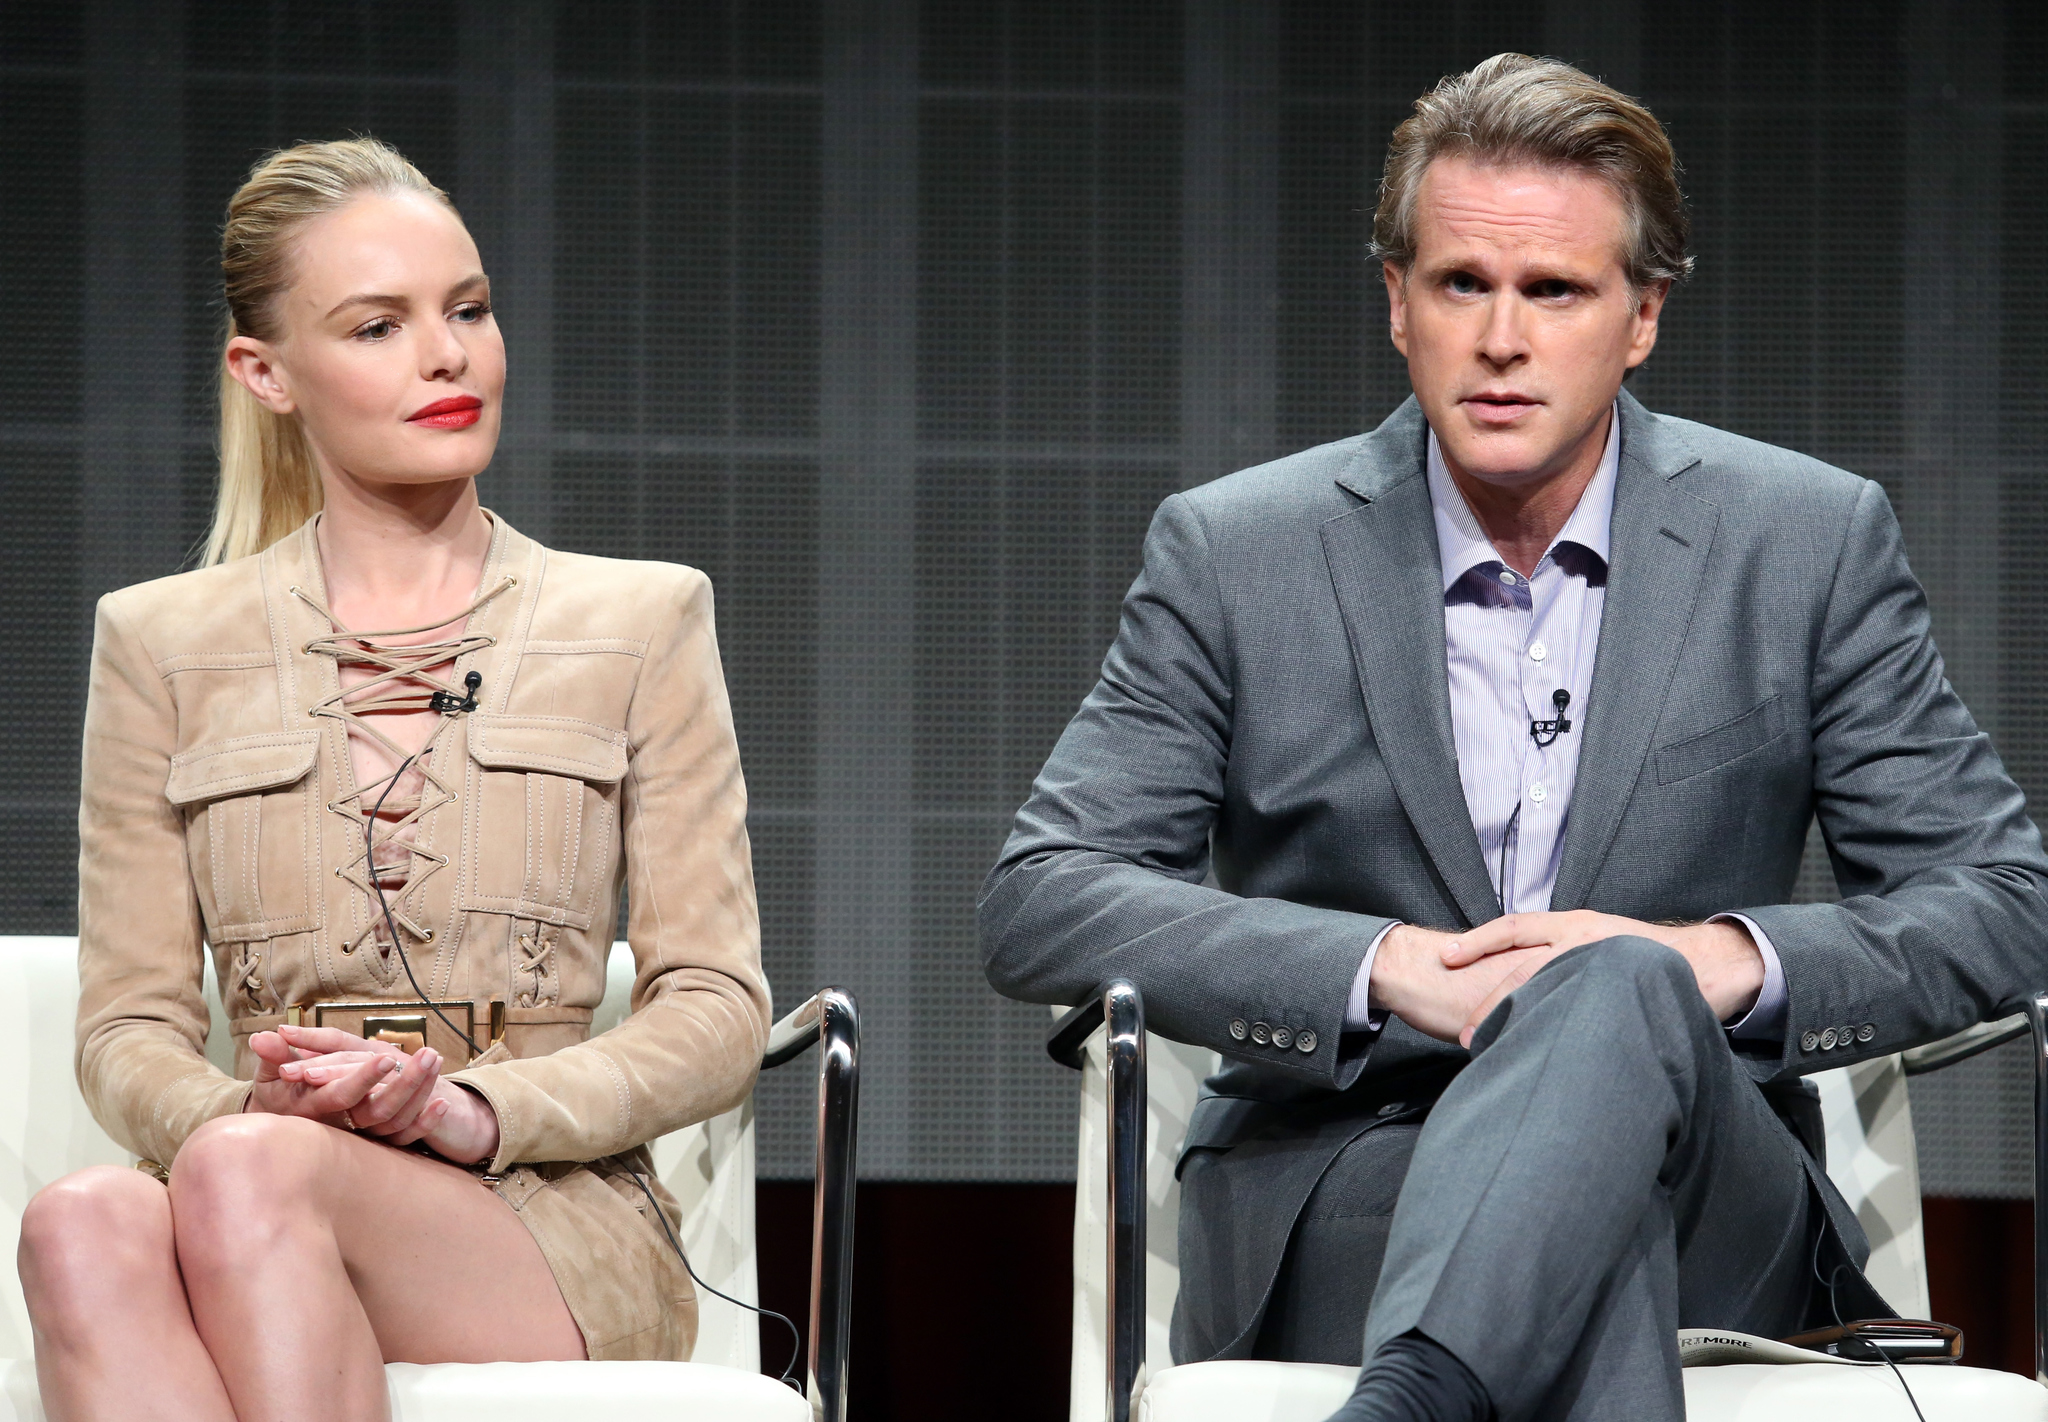 Cary Elwes and Kate Bosworth at event of The Art of More (2015)